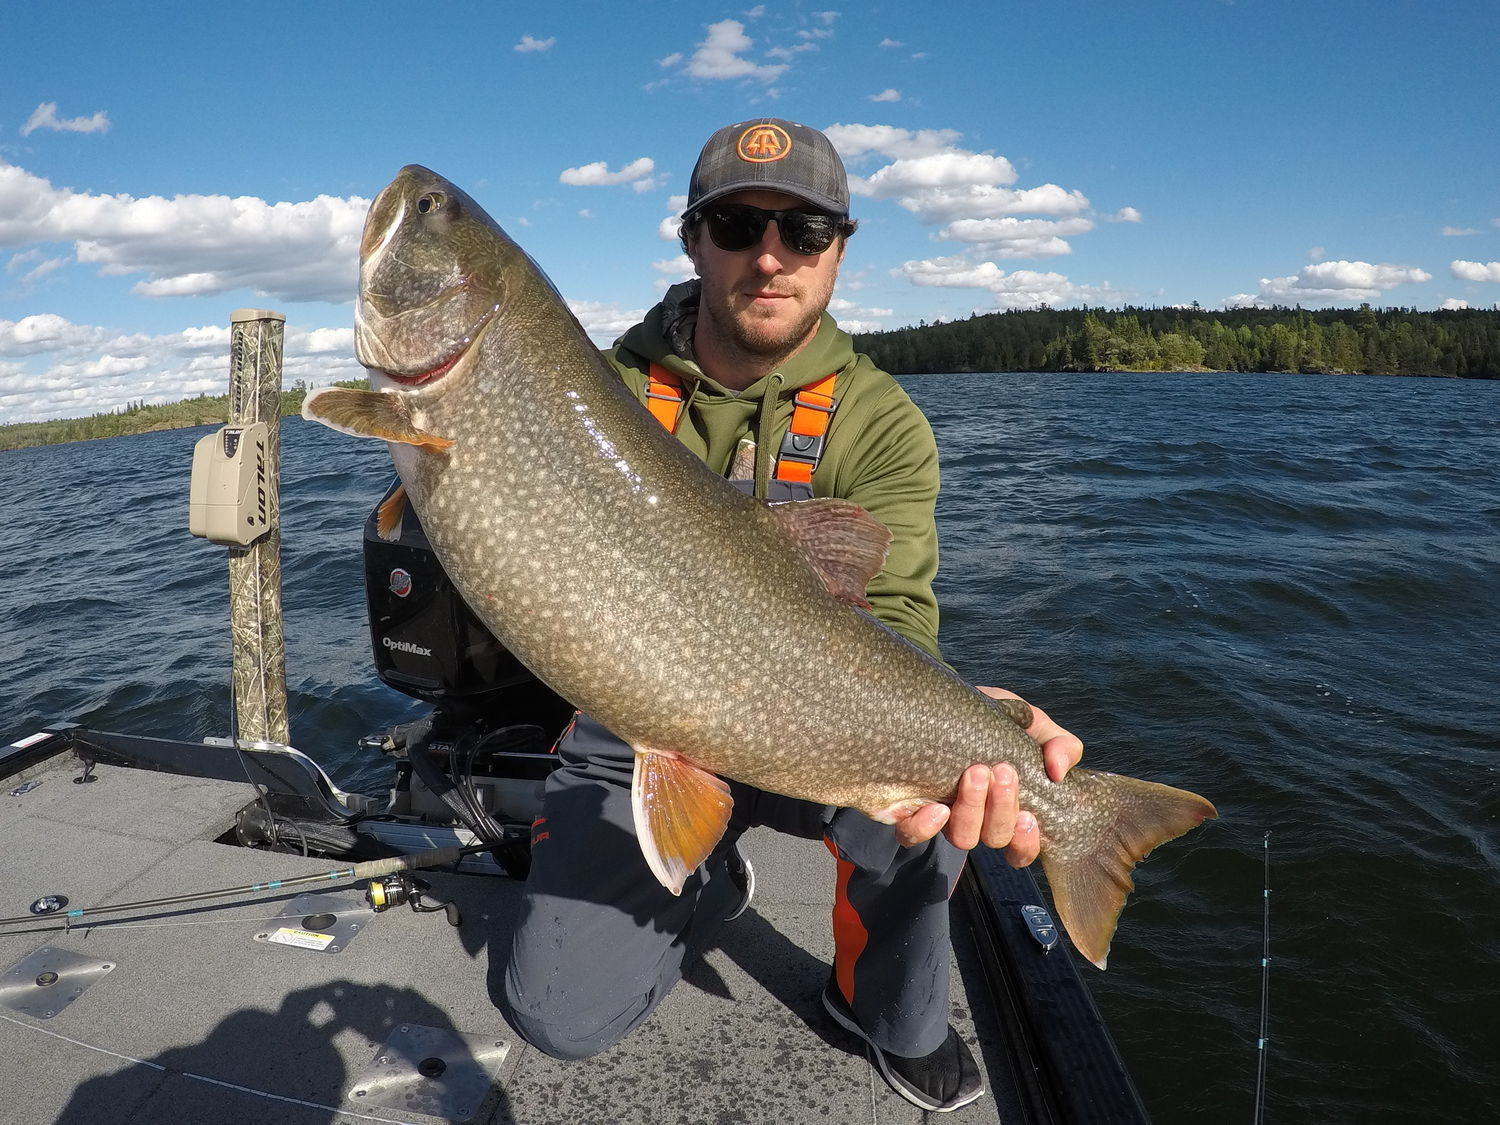 Fall is a great time to catch small lake trout